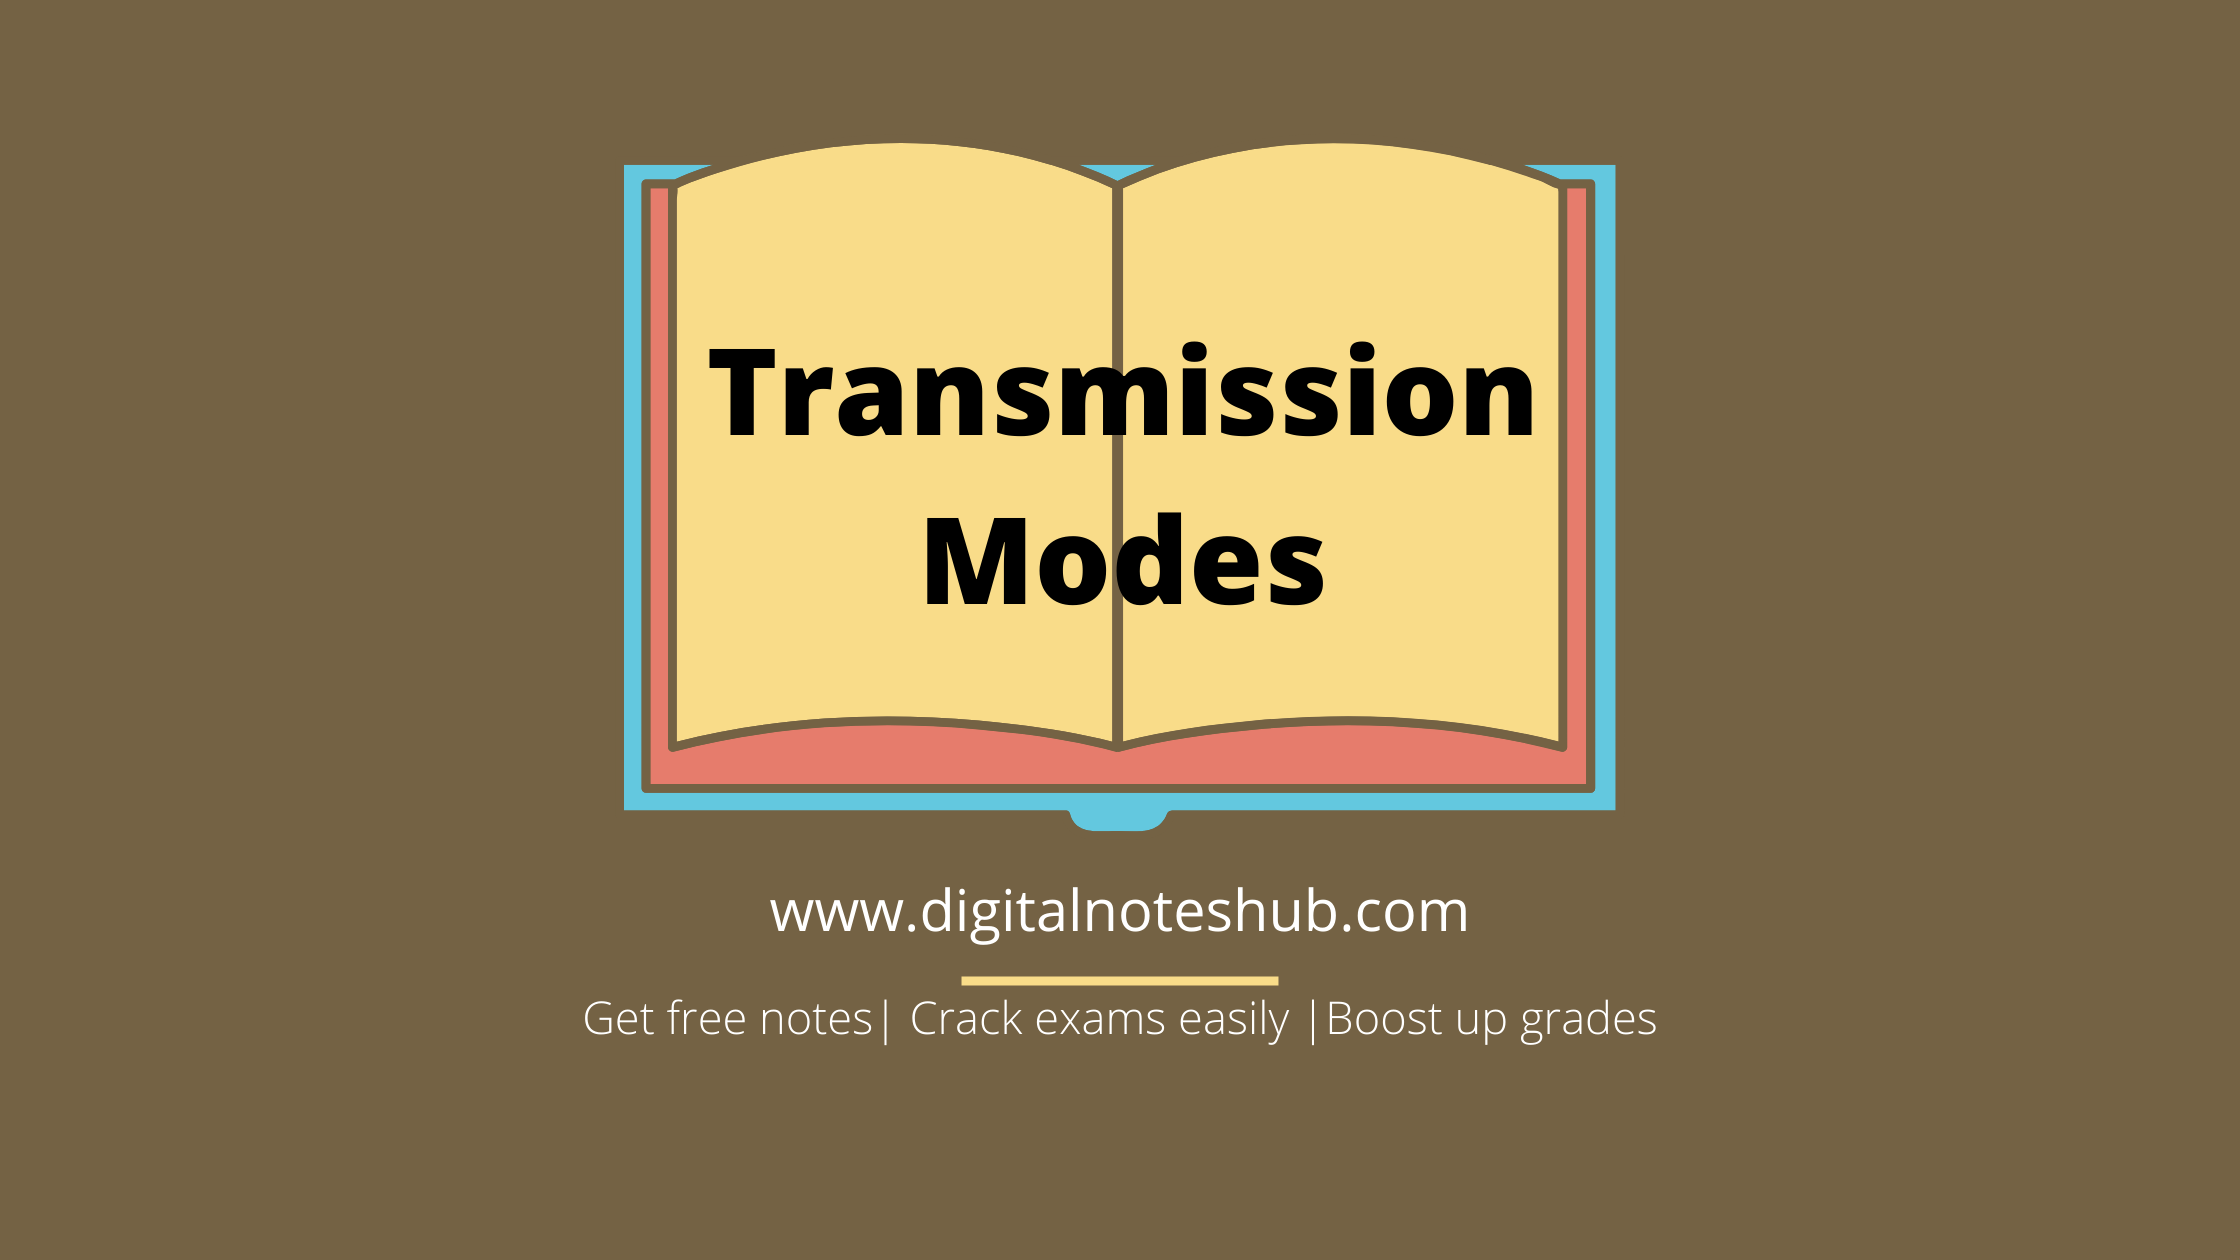 Transmission modes in computer networks